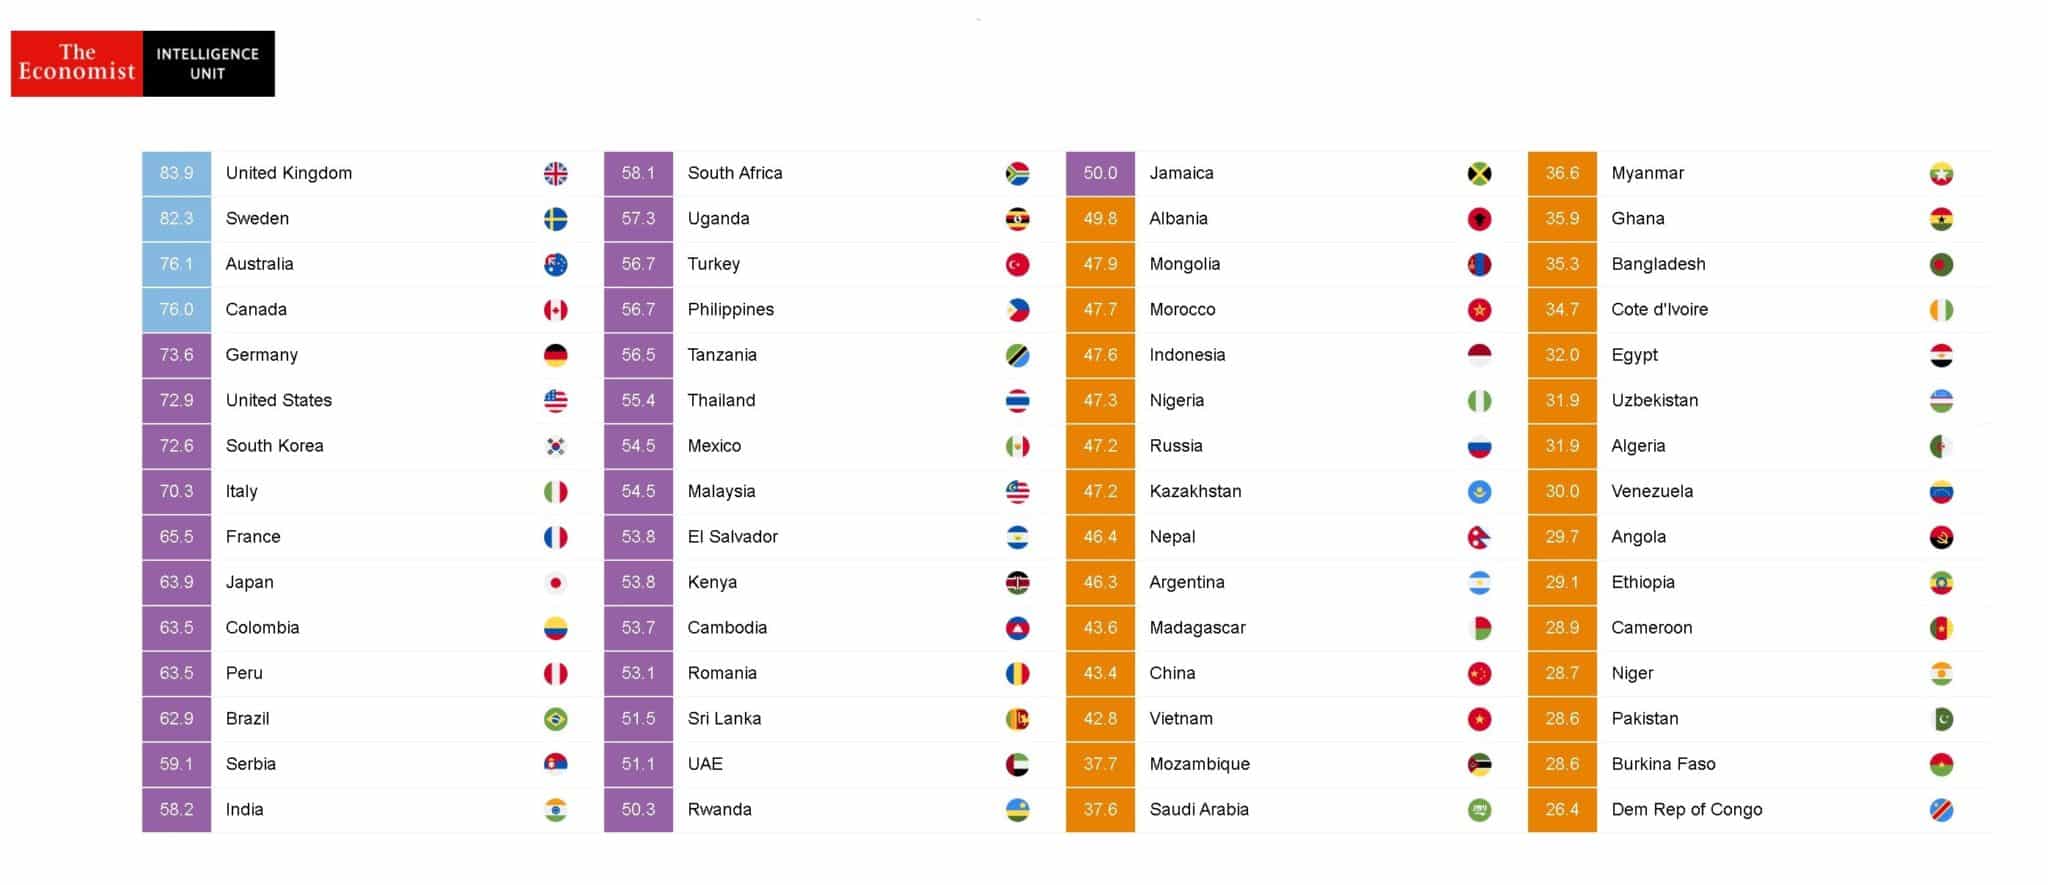 According to this index, while the United Kingdom is the safest country for children to grow up, the Democratic Republic of Congo is the least safe.